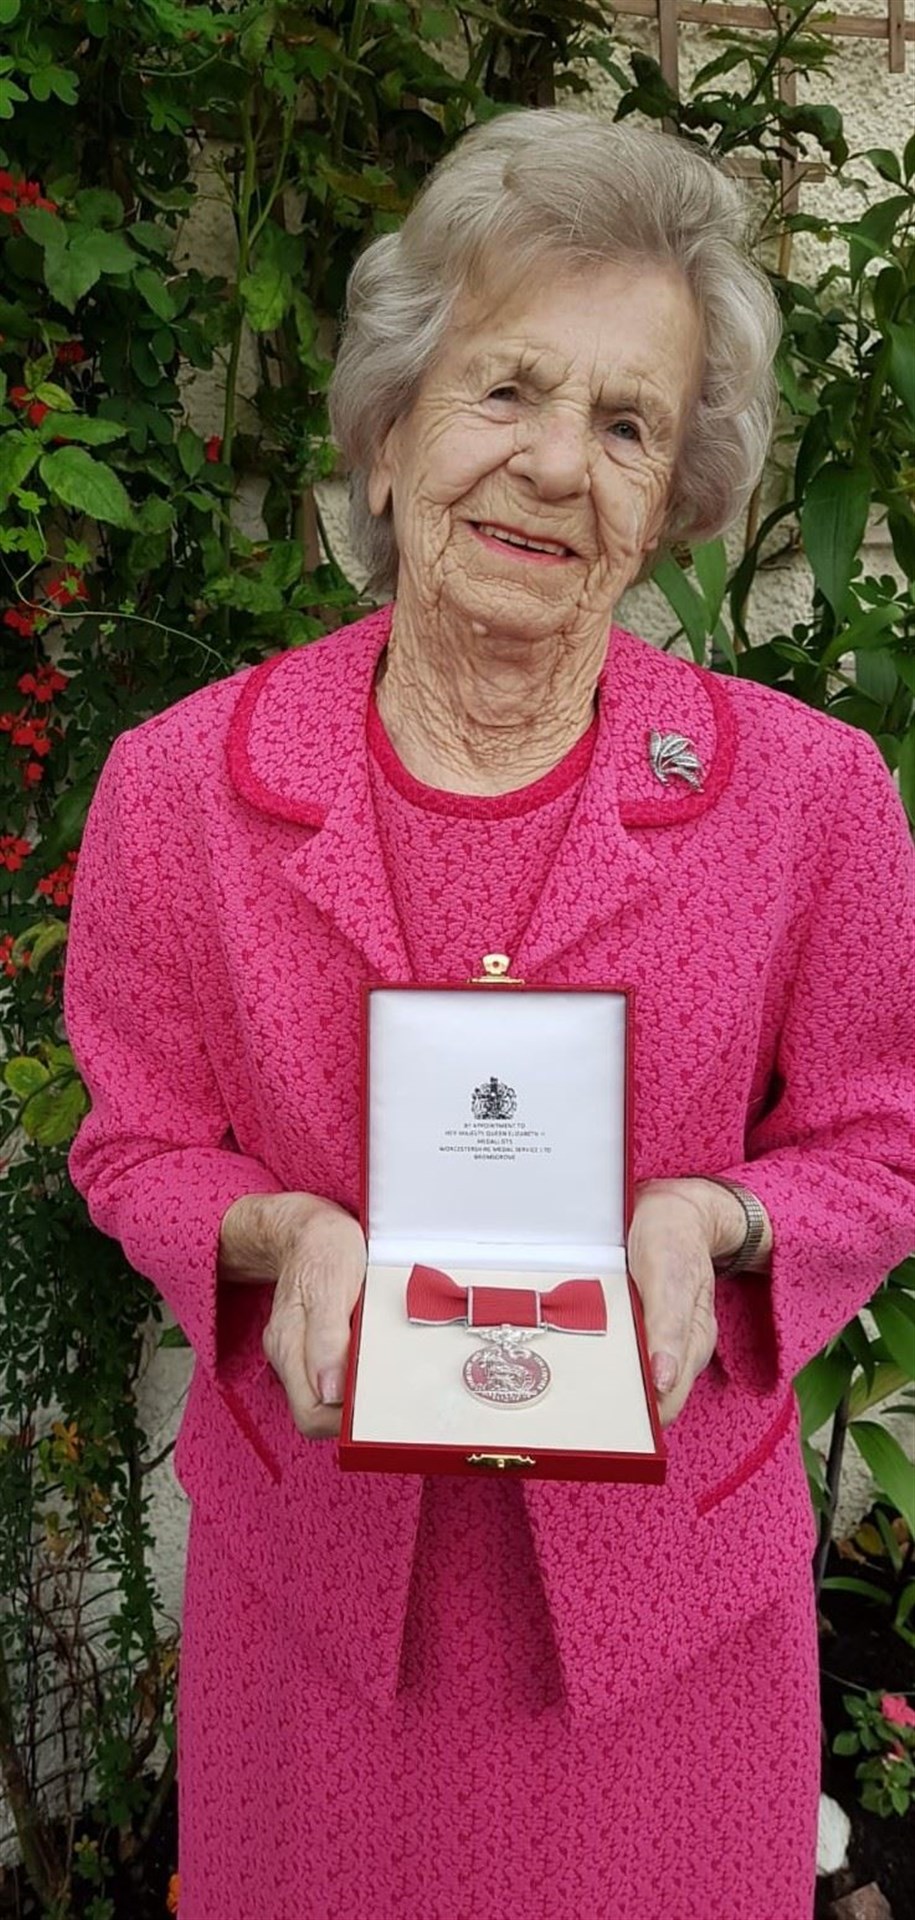 Isobel Harling received her gong from the Lord Lieutenant's Office earlier this week – in the post!